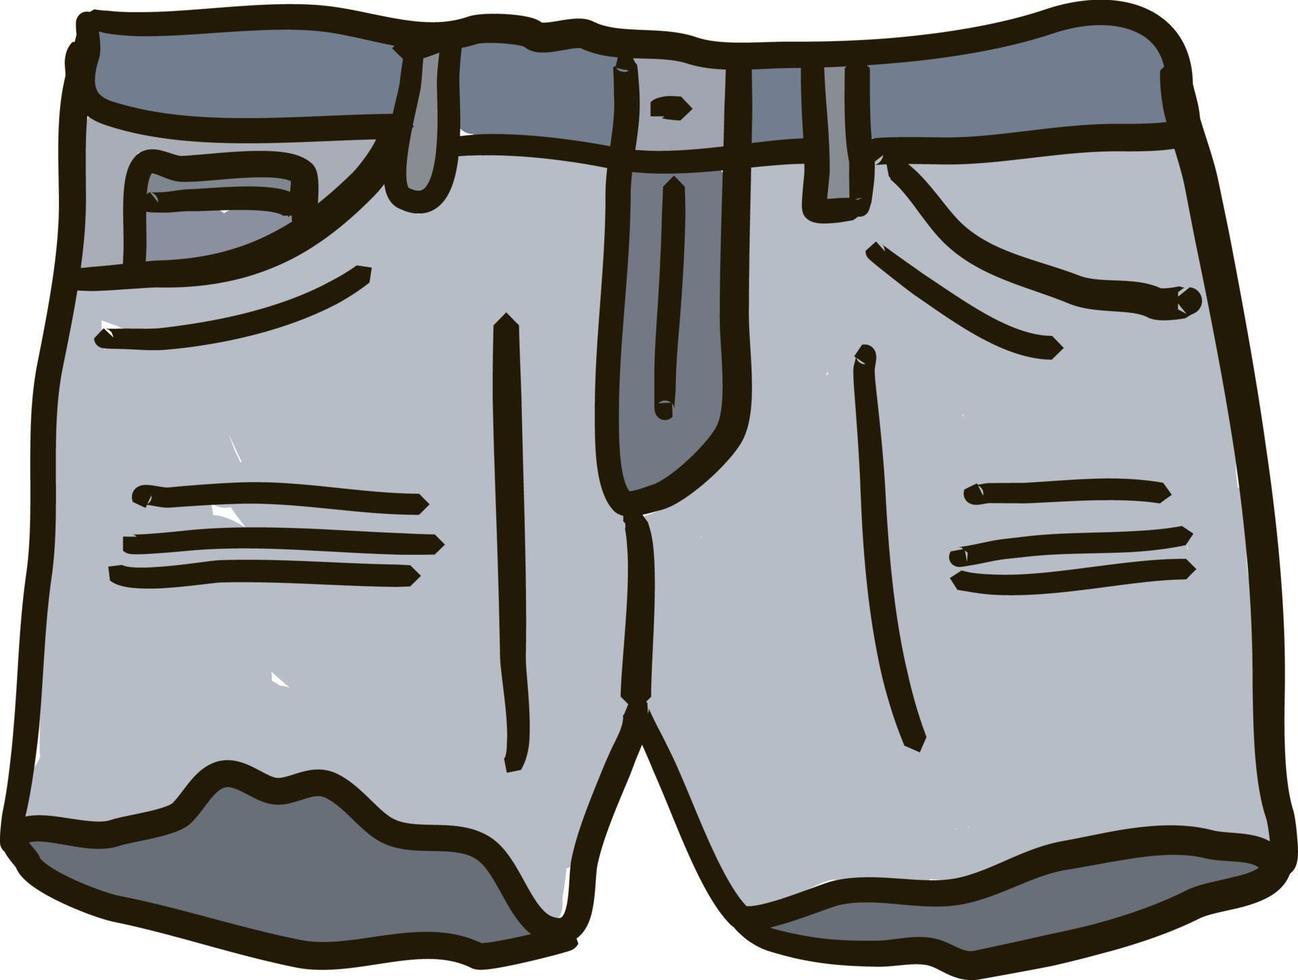 Texas jeans shorts, illustration, vector on white background.